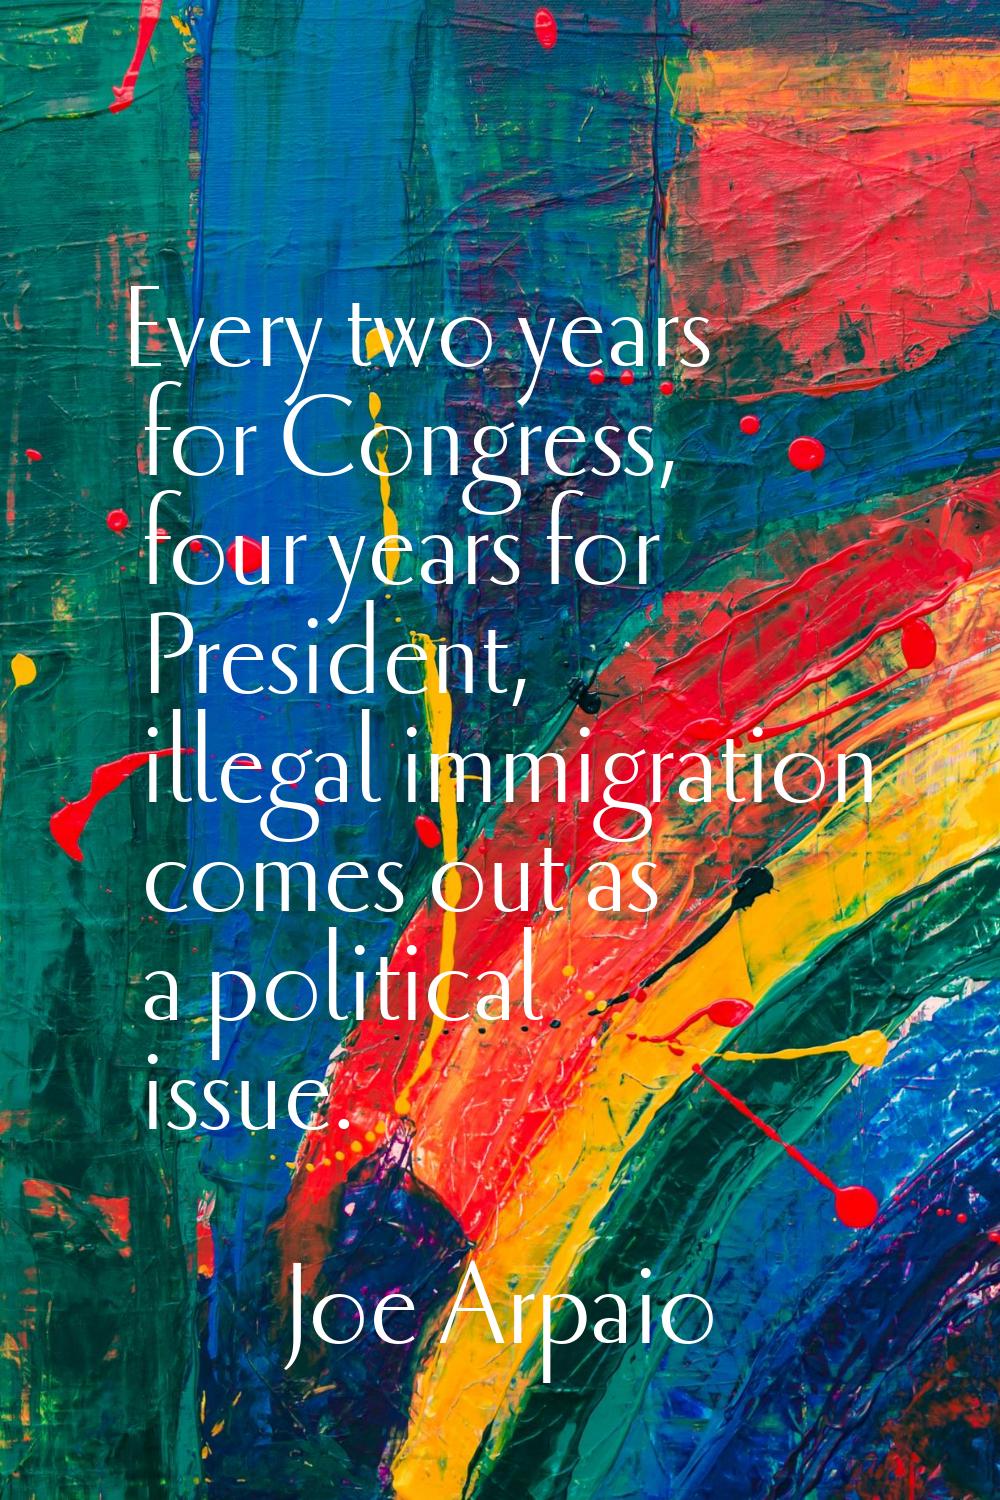 Every two years for Congress, four years for President, illegal immigration comes out as a politica